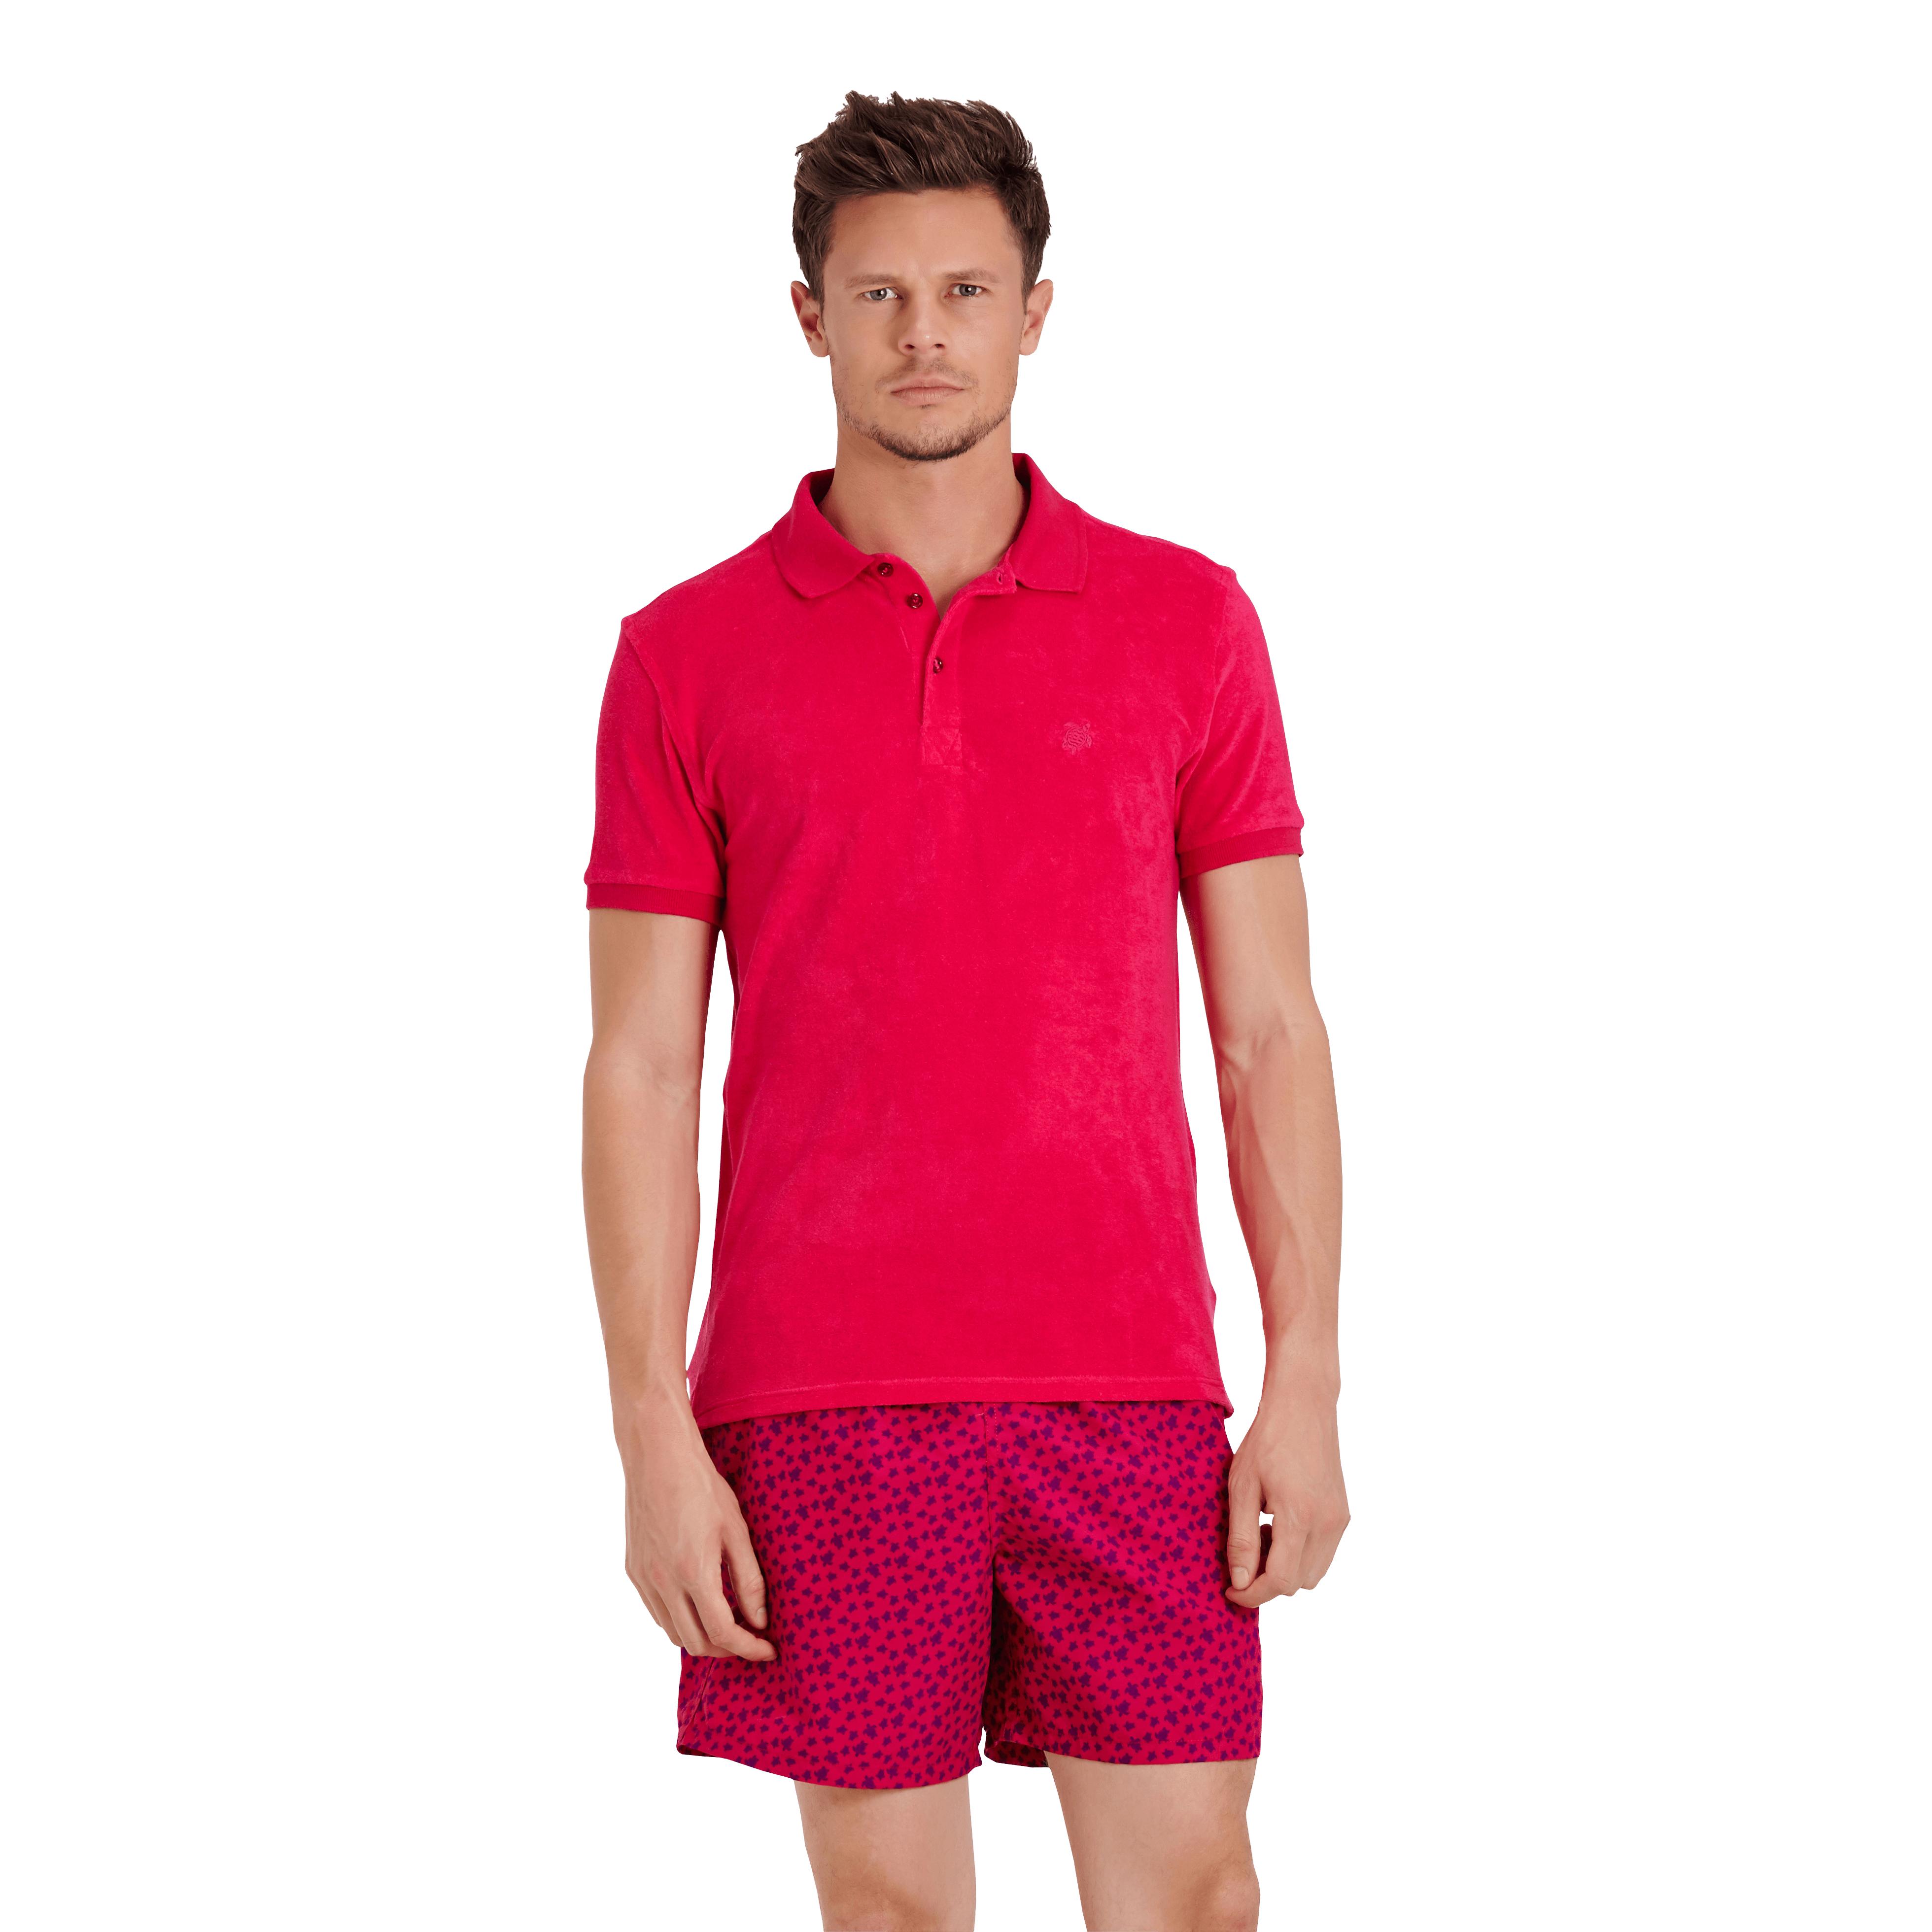 Vilebrequin Cotton Men Terry Cloth Polo Shirt Solid in Red for Men - Lyst